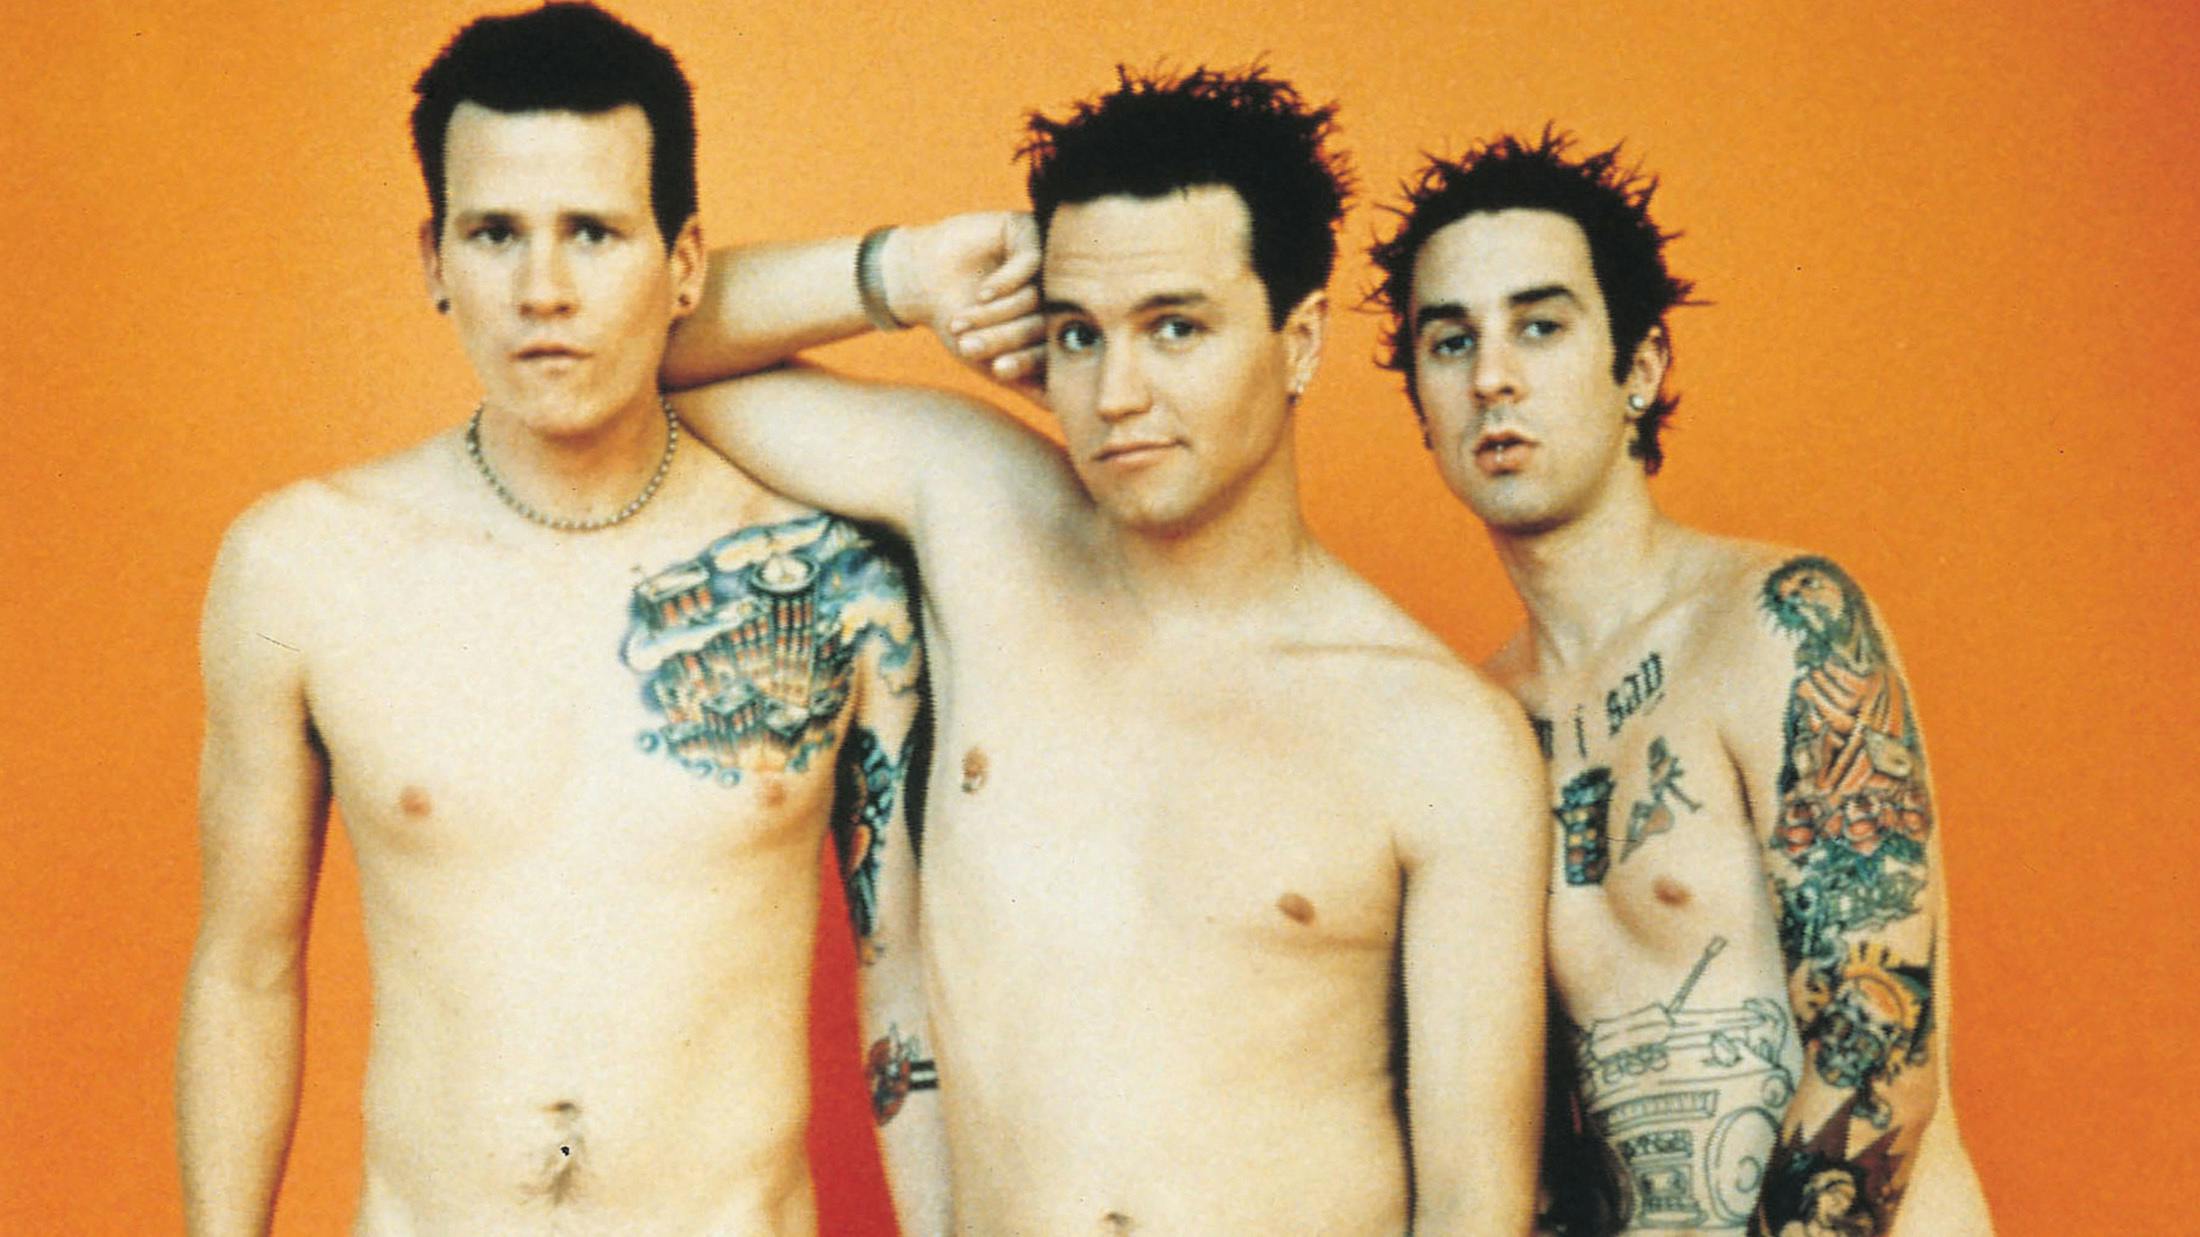 “Being thought of as a joke band is better than an ‘art band’”: The inside story of blink-182's Enema Of The State